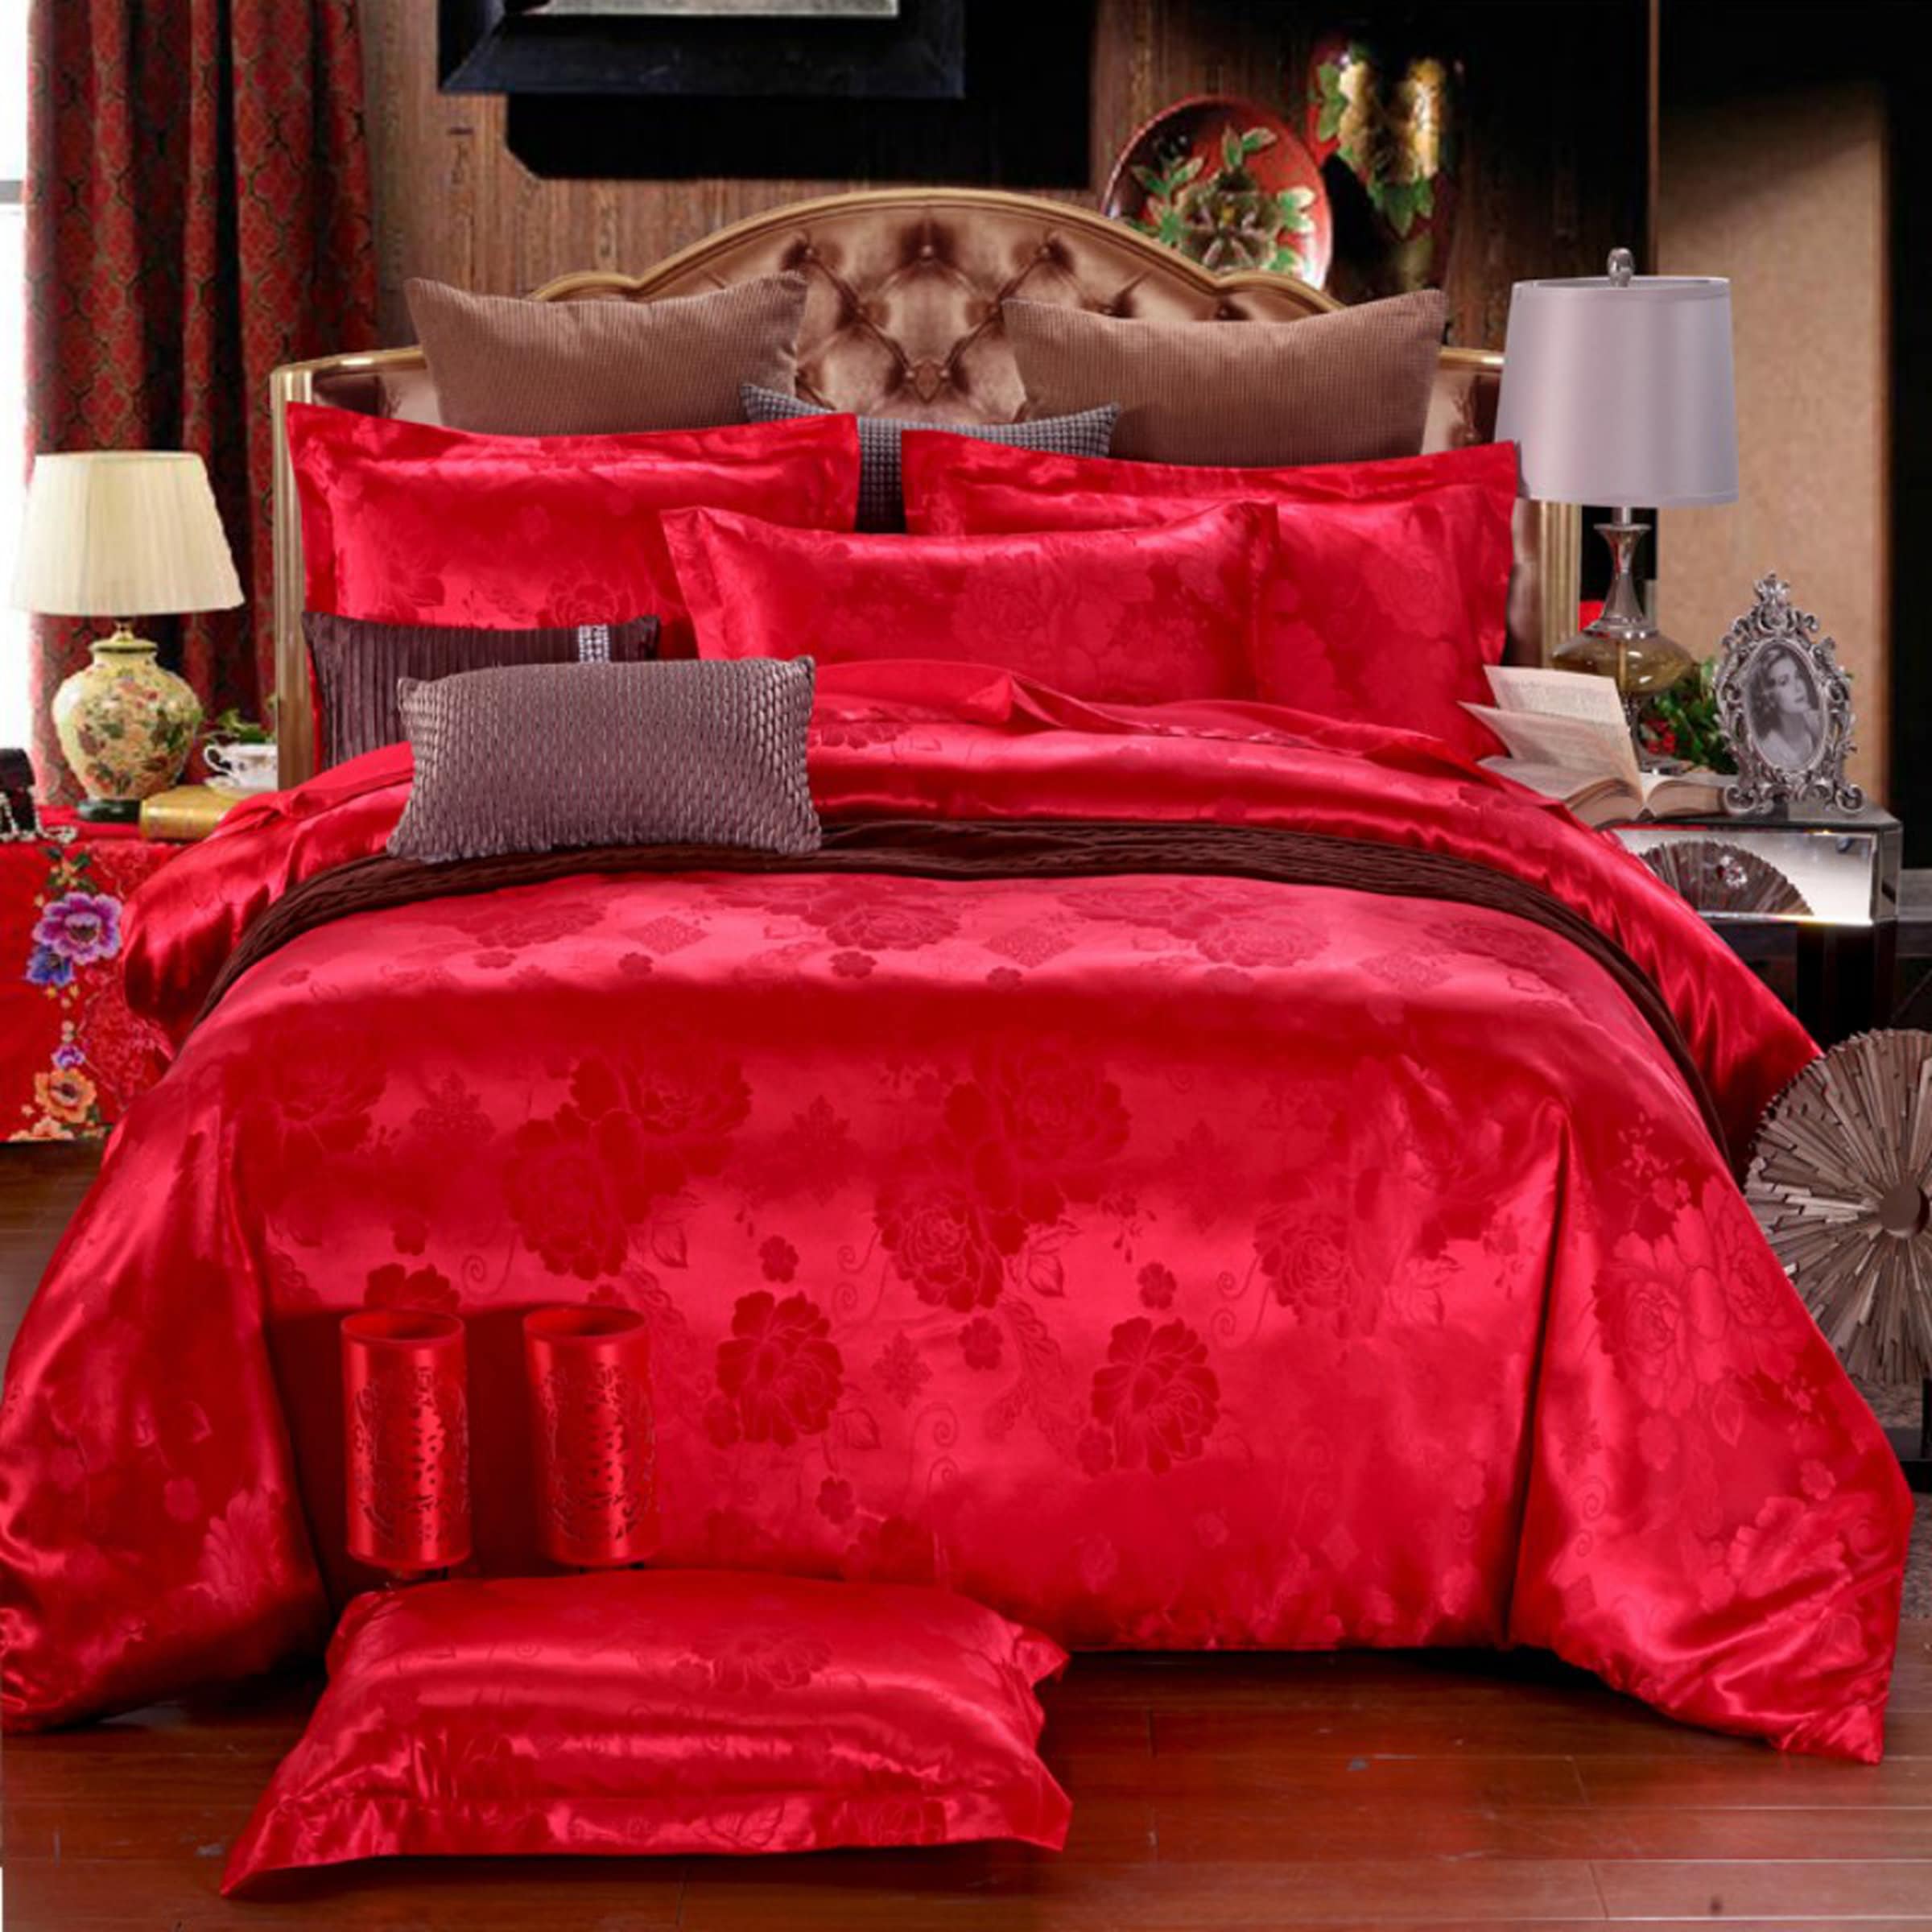 daintyduvet Luxury Red Duvet Cover Set, Jacquard Fabric Aesthetic Bedding Decorative, Embroidered Bedding Set